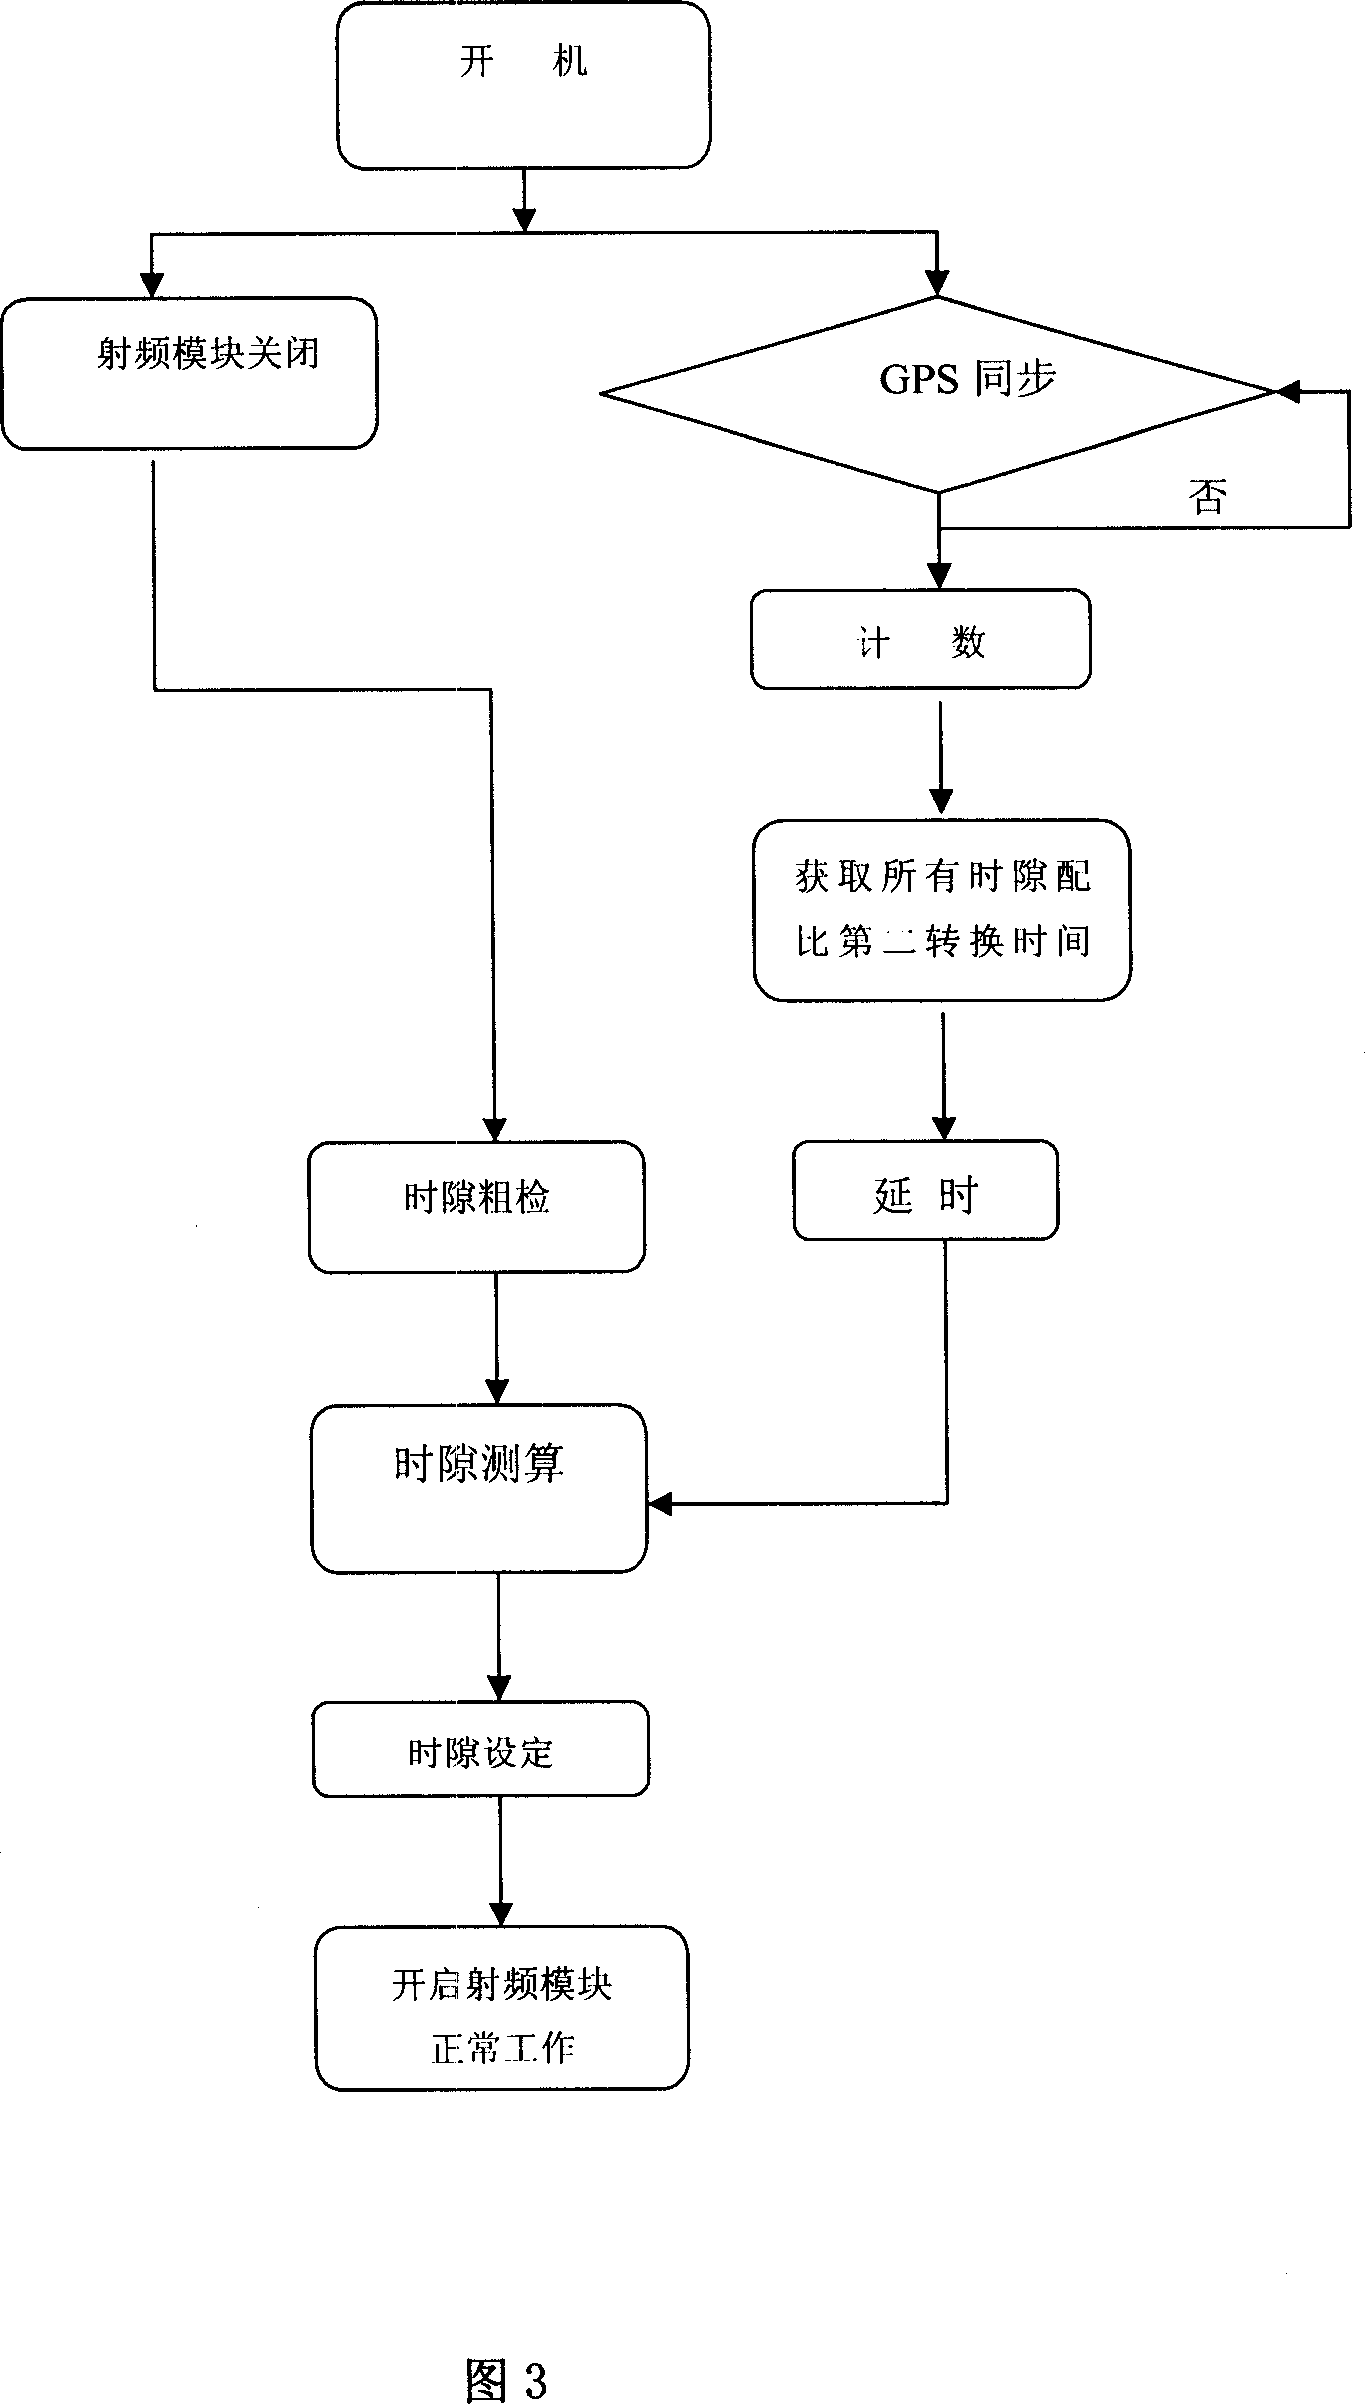 Configuration device and adjusting method of the time slot of the wireless network direct station based on the satellite synchronization